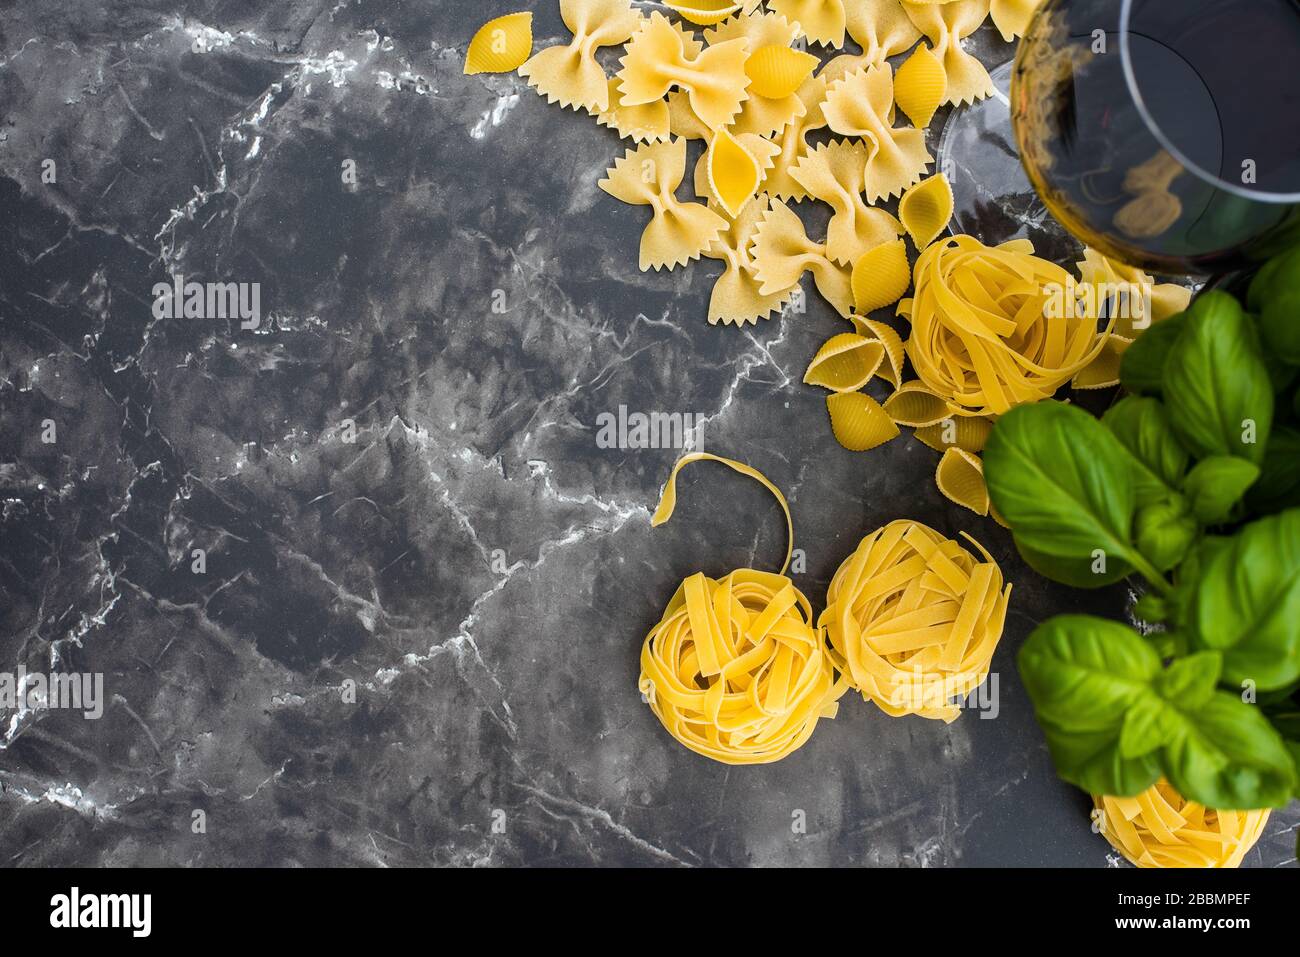 Dry pasta on black marble worktop with red wine & basil Stock Photo